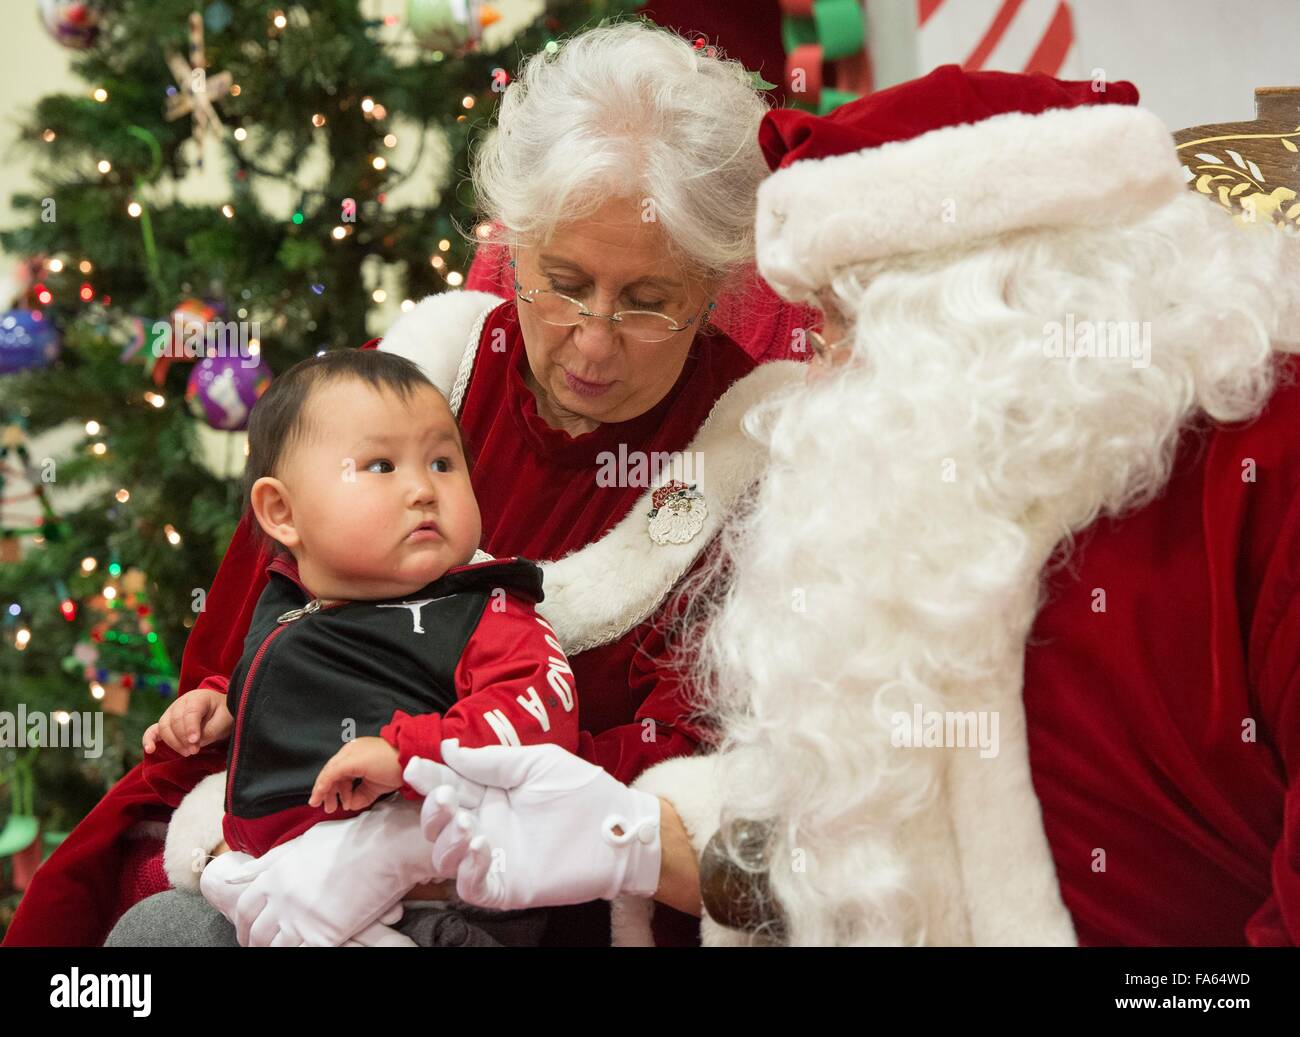 Santa Claus sits with Mrs Claus and a Native Alaskan child during a visit to remote villages as part of Operation Santa Claus December 5, 2015 in St. Mary's, Alaska. The program has been held for 59 years and brings Christmas cheer to underserved, remote villages across Alaska. Stock Photo